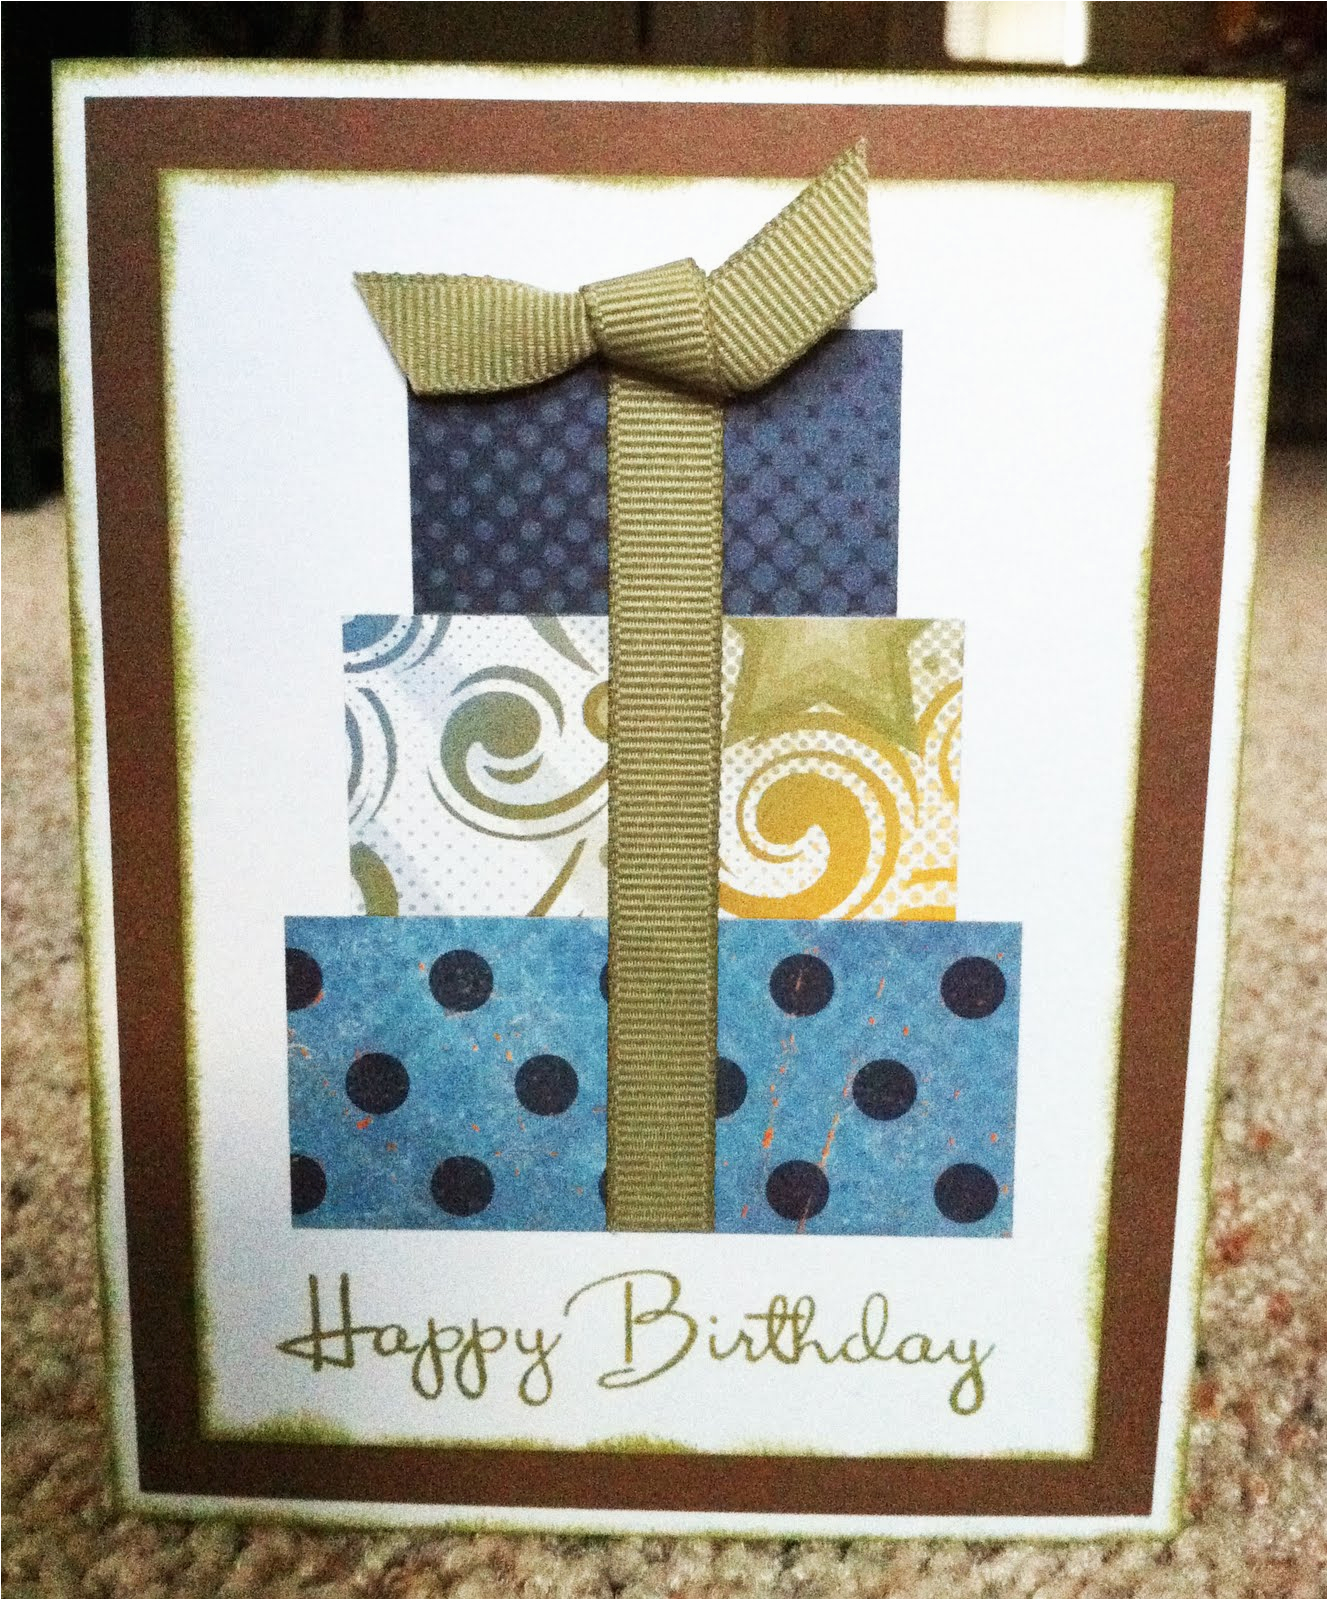 Masculine Birthday Cards to Make Playing with Paper Scrapbooks Cards Diy Masculine